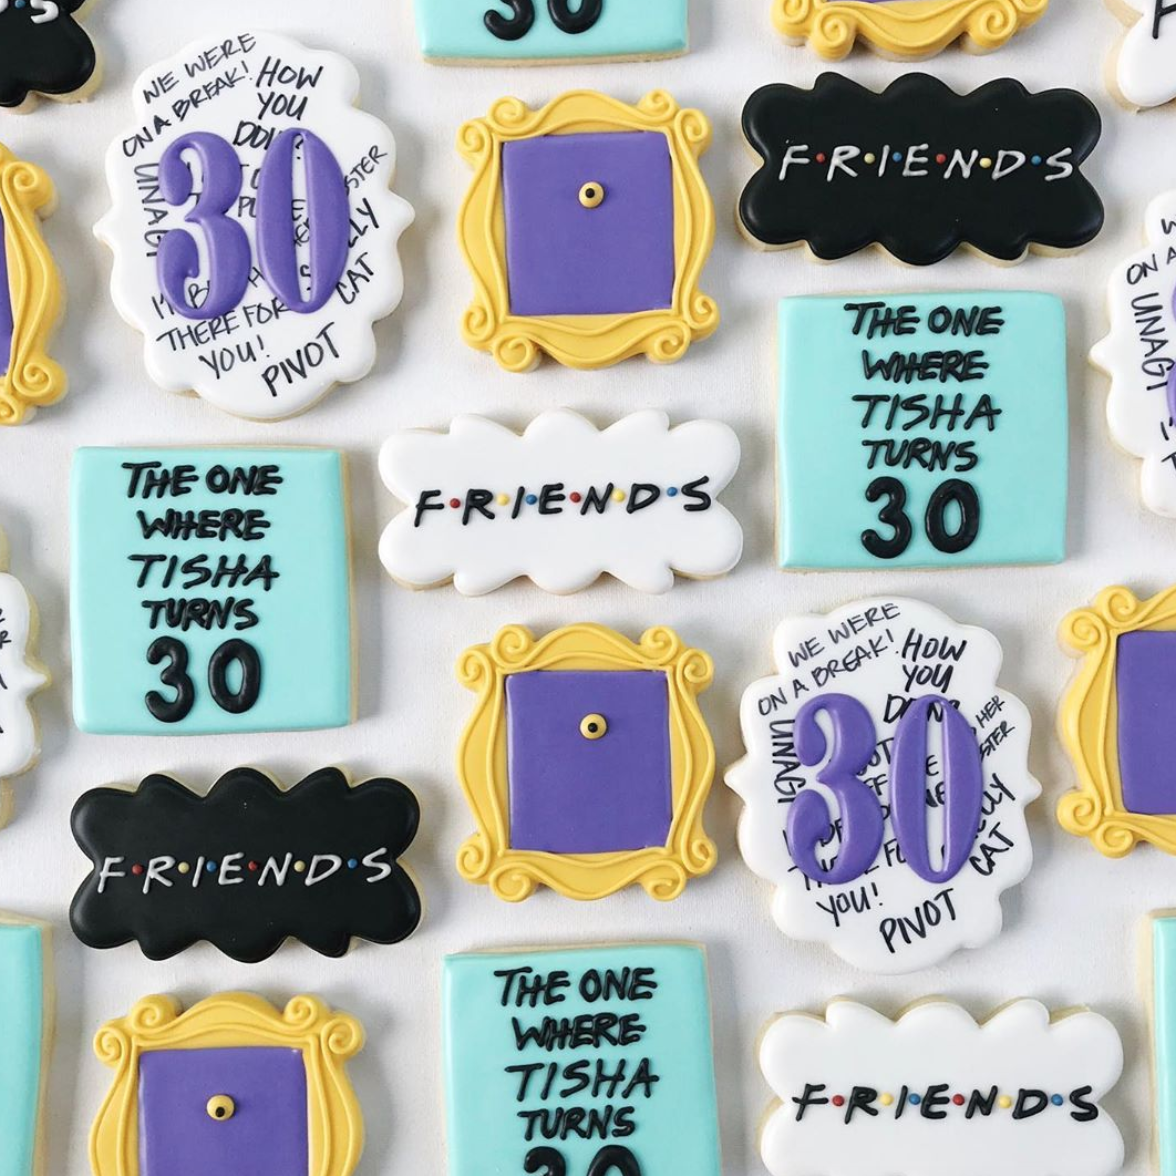 15 Best 30th Birthday Ideas and Themes - Unique 30th Birthday Party Decorations